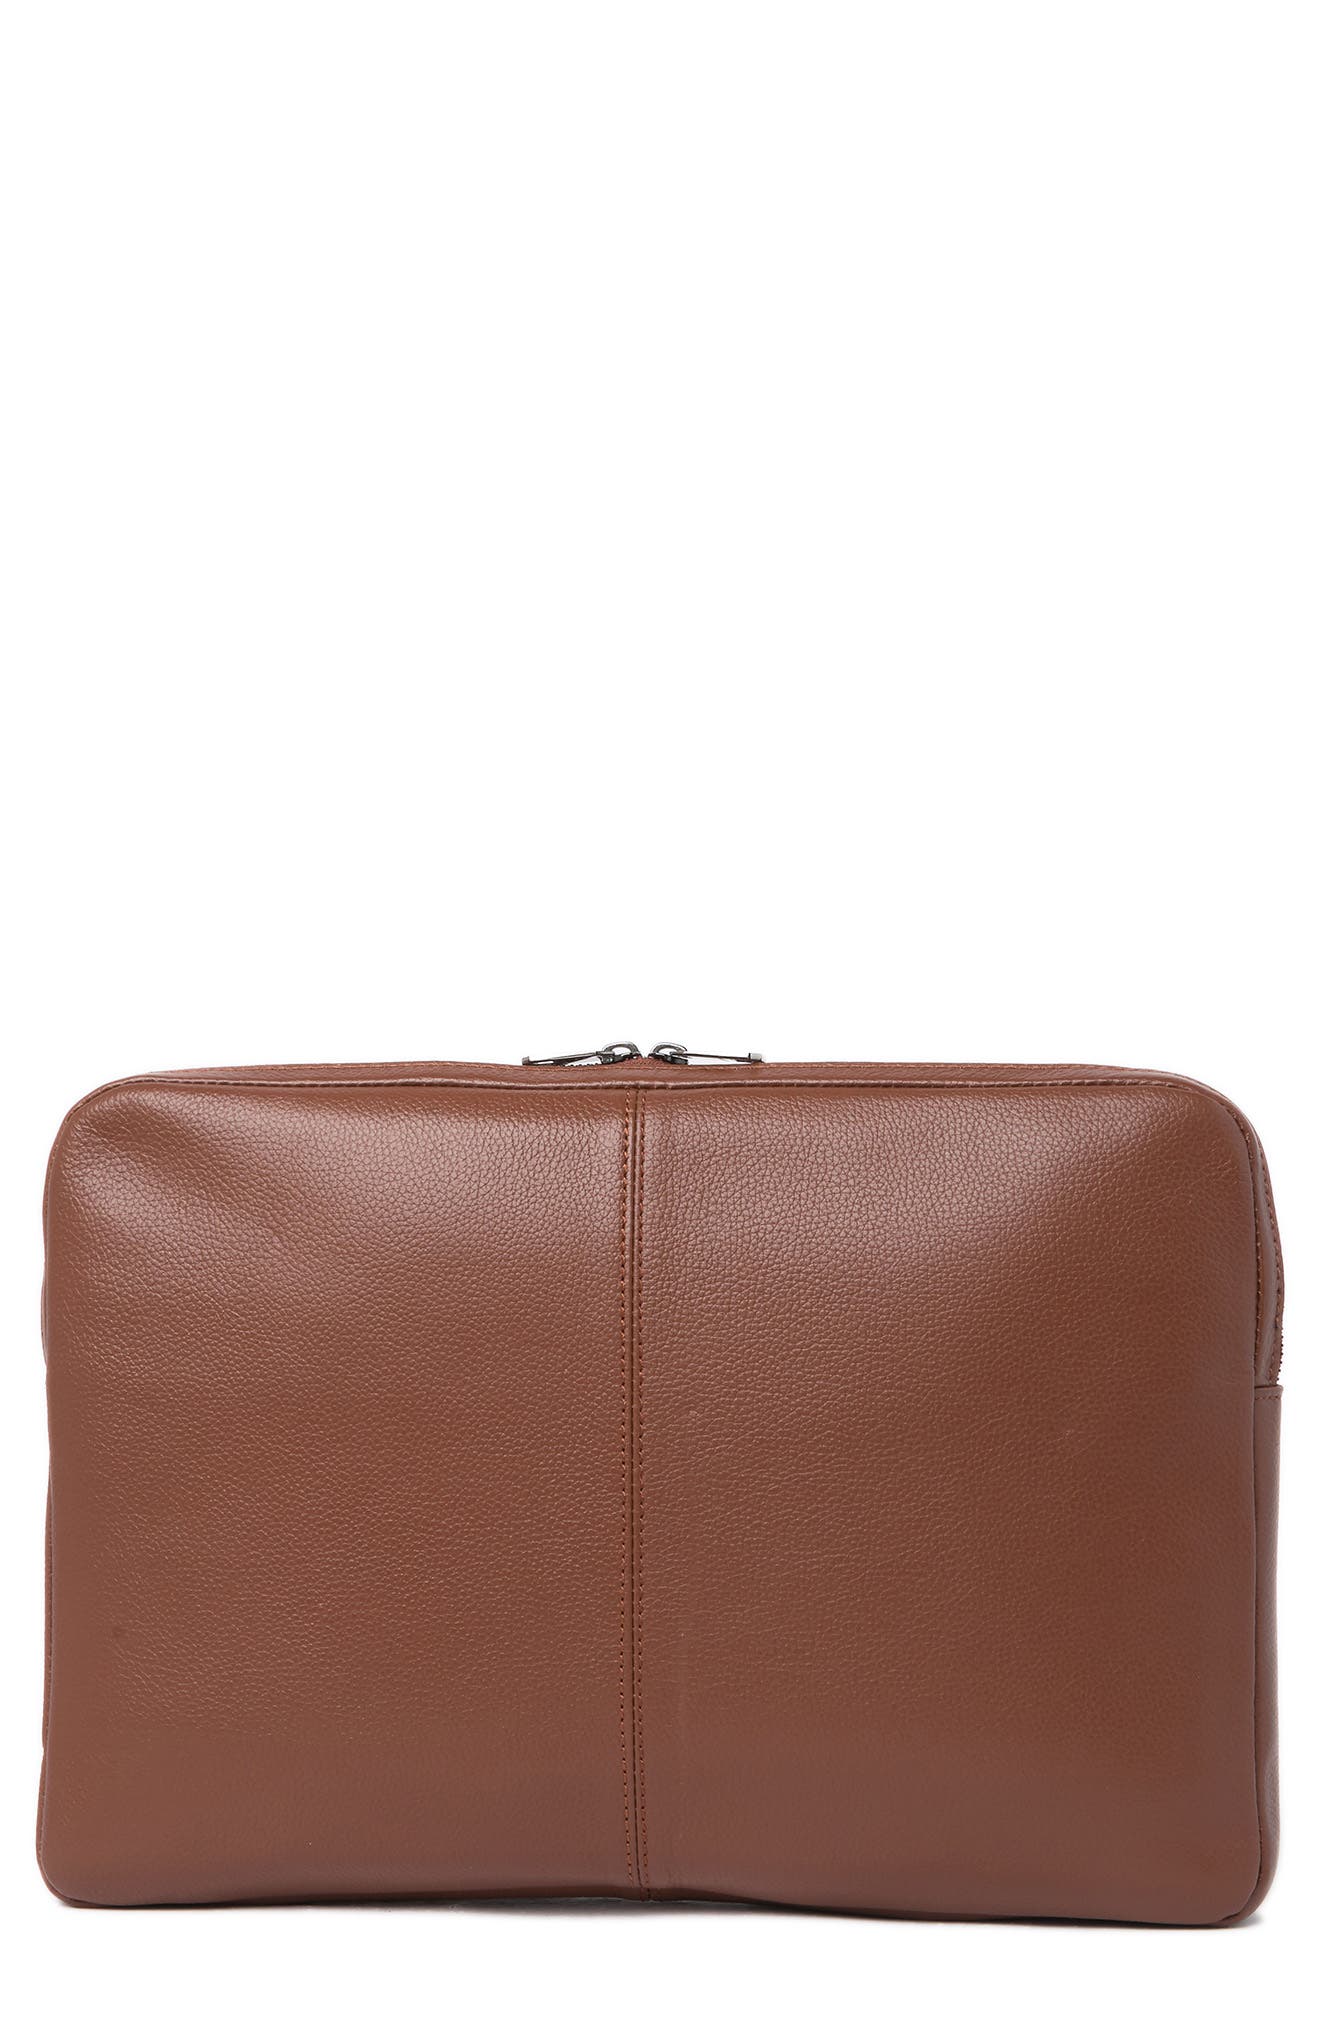 Bugatti Beyond Day Pebbled Leather Bag In Cognac